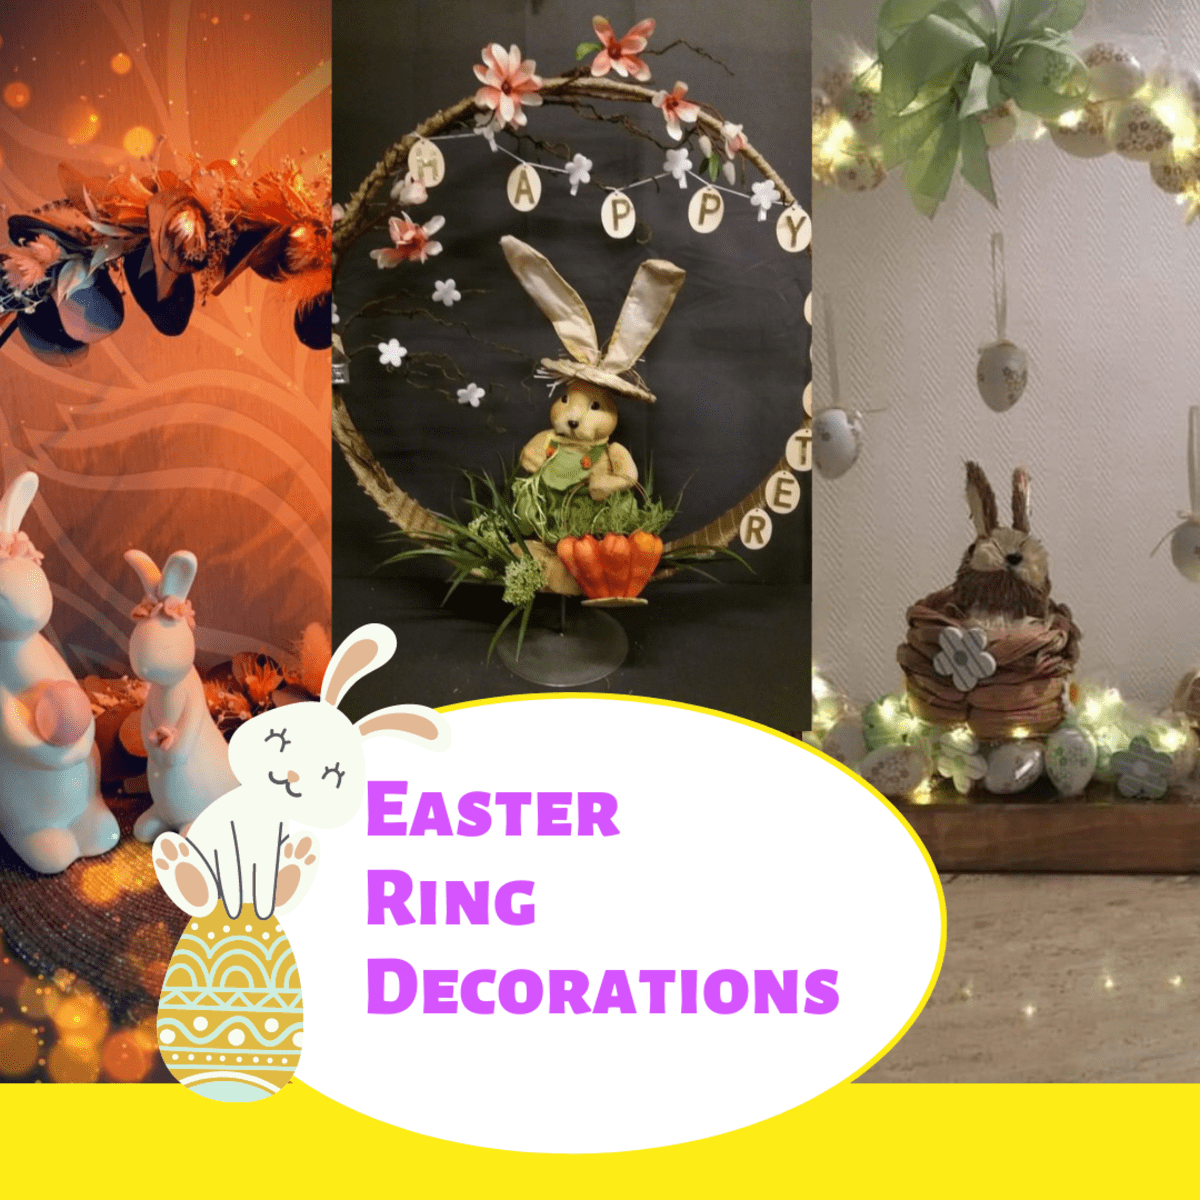 How To Store Easter Decorations